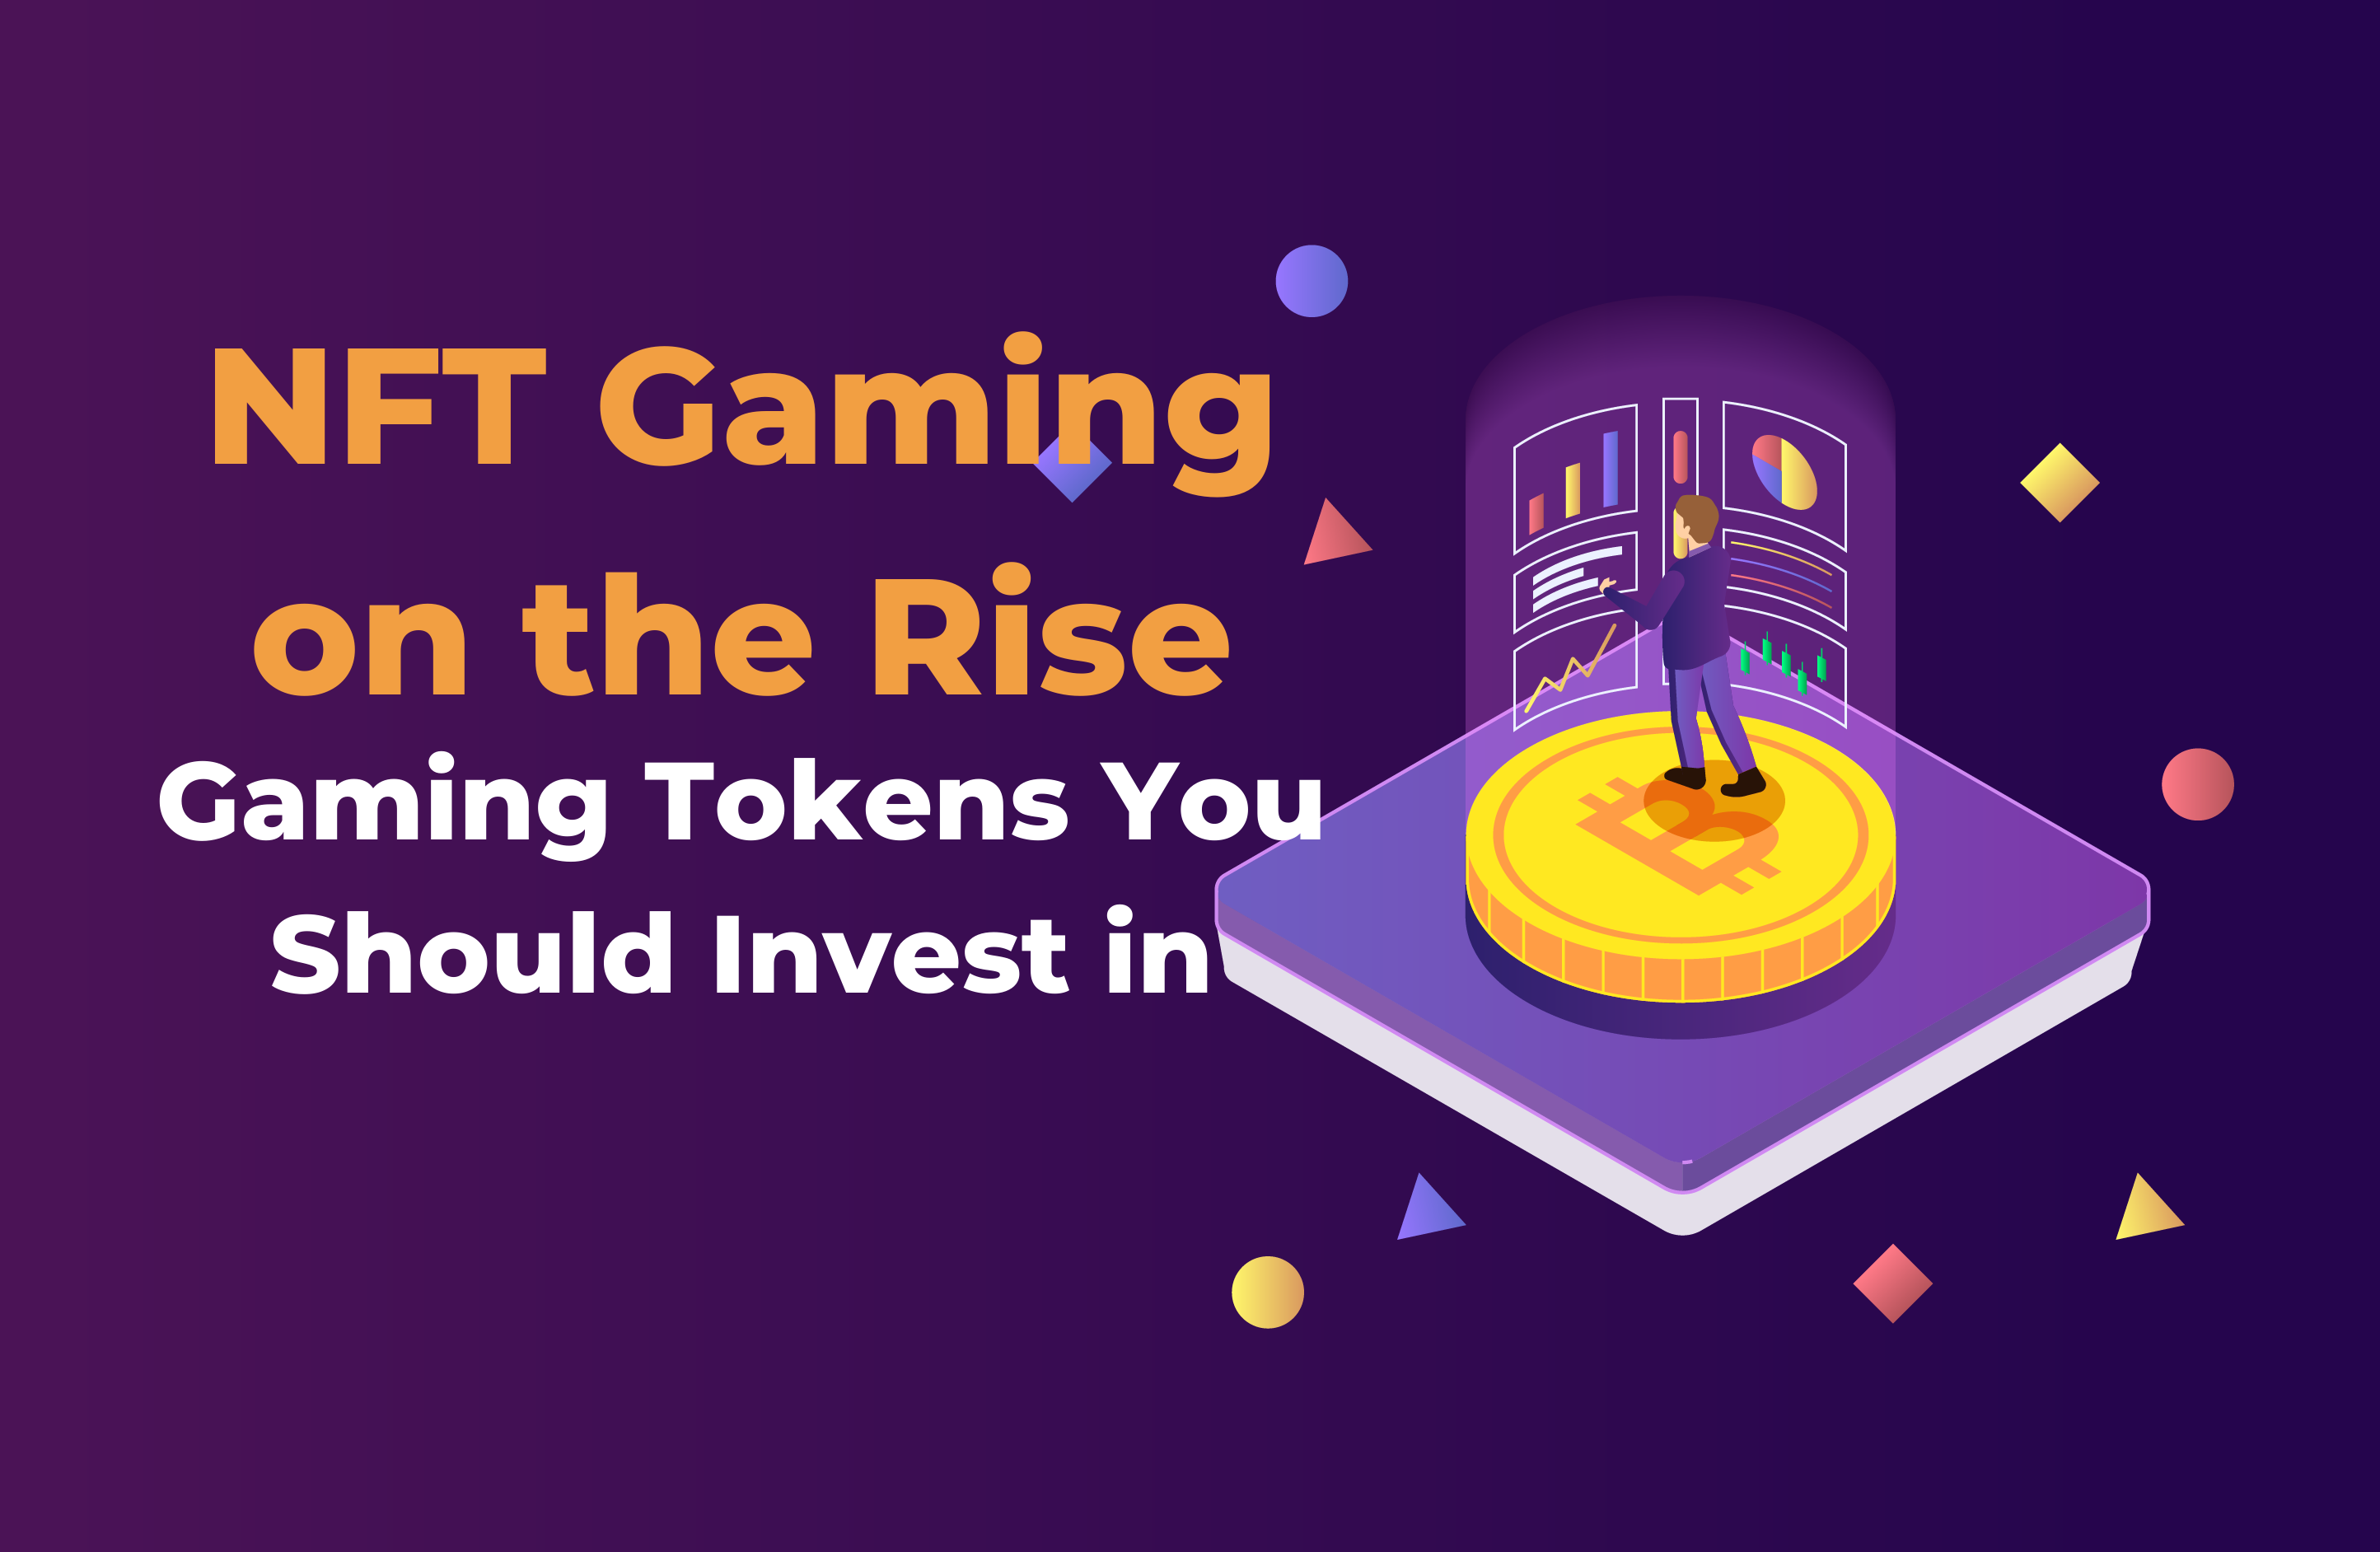 Gaming Tokens You Should Invest in